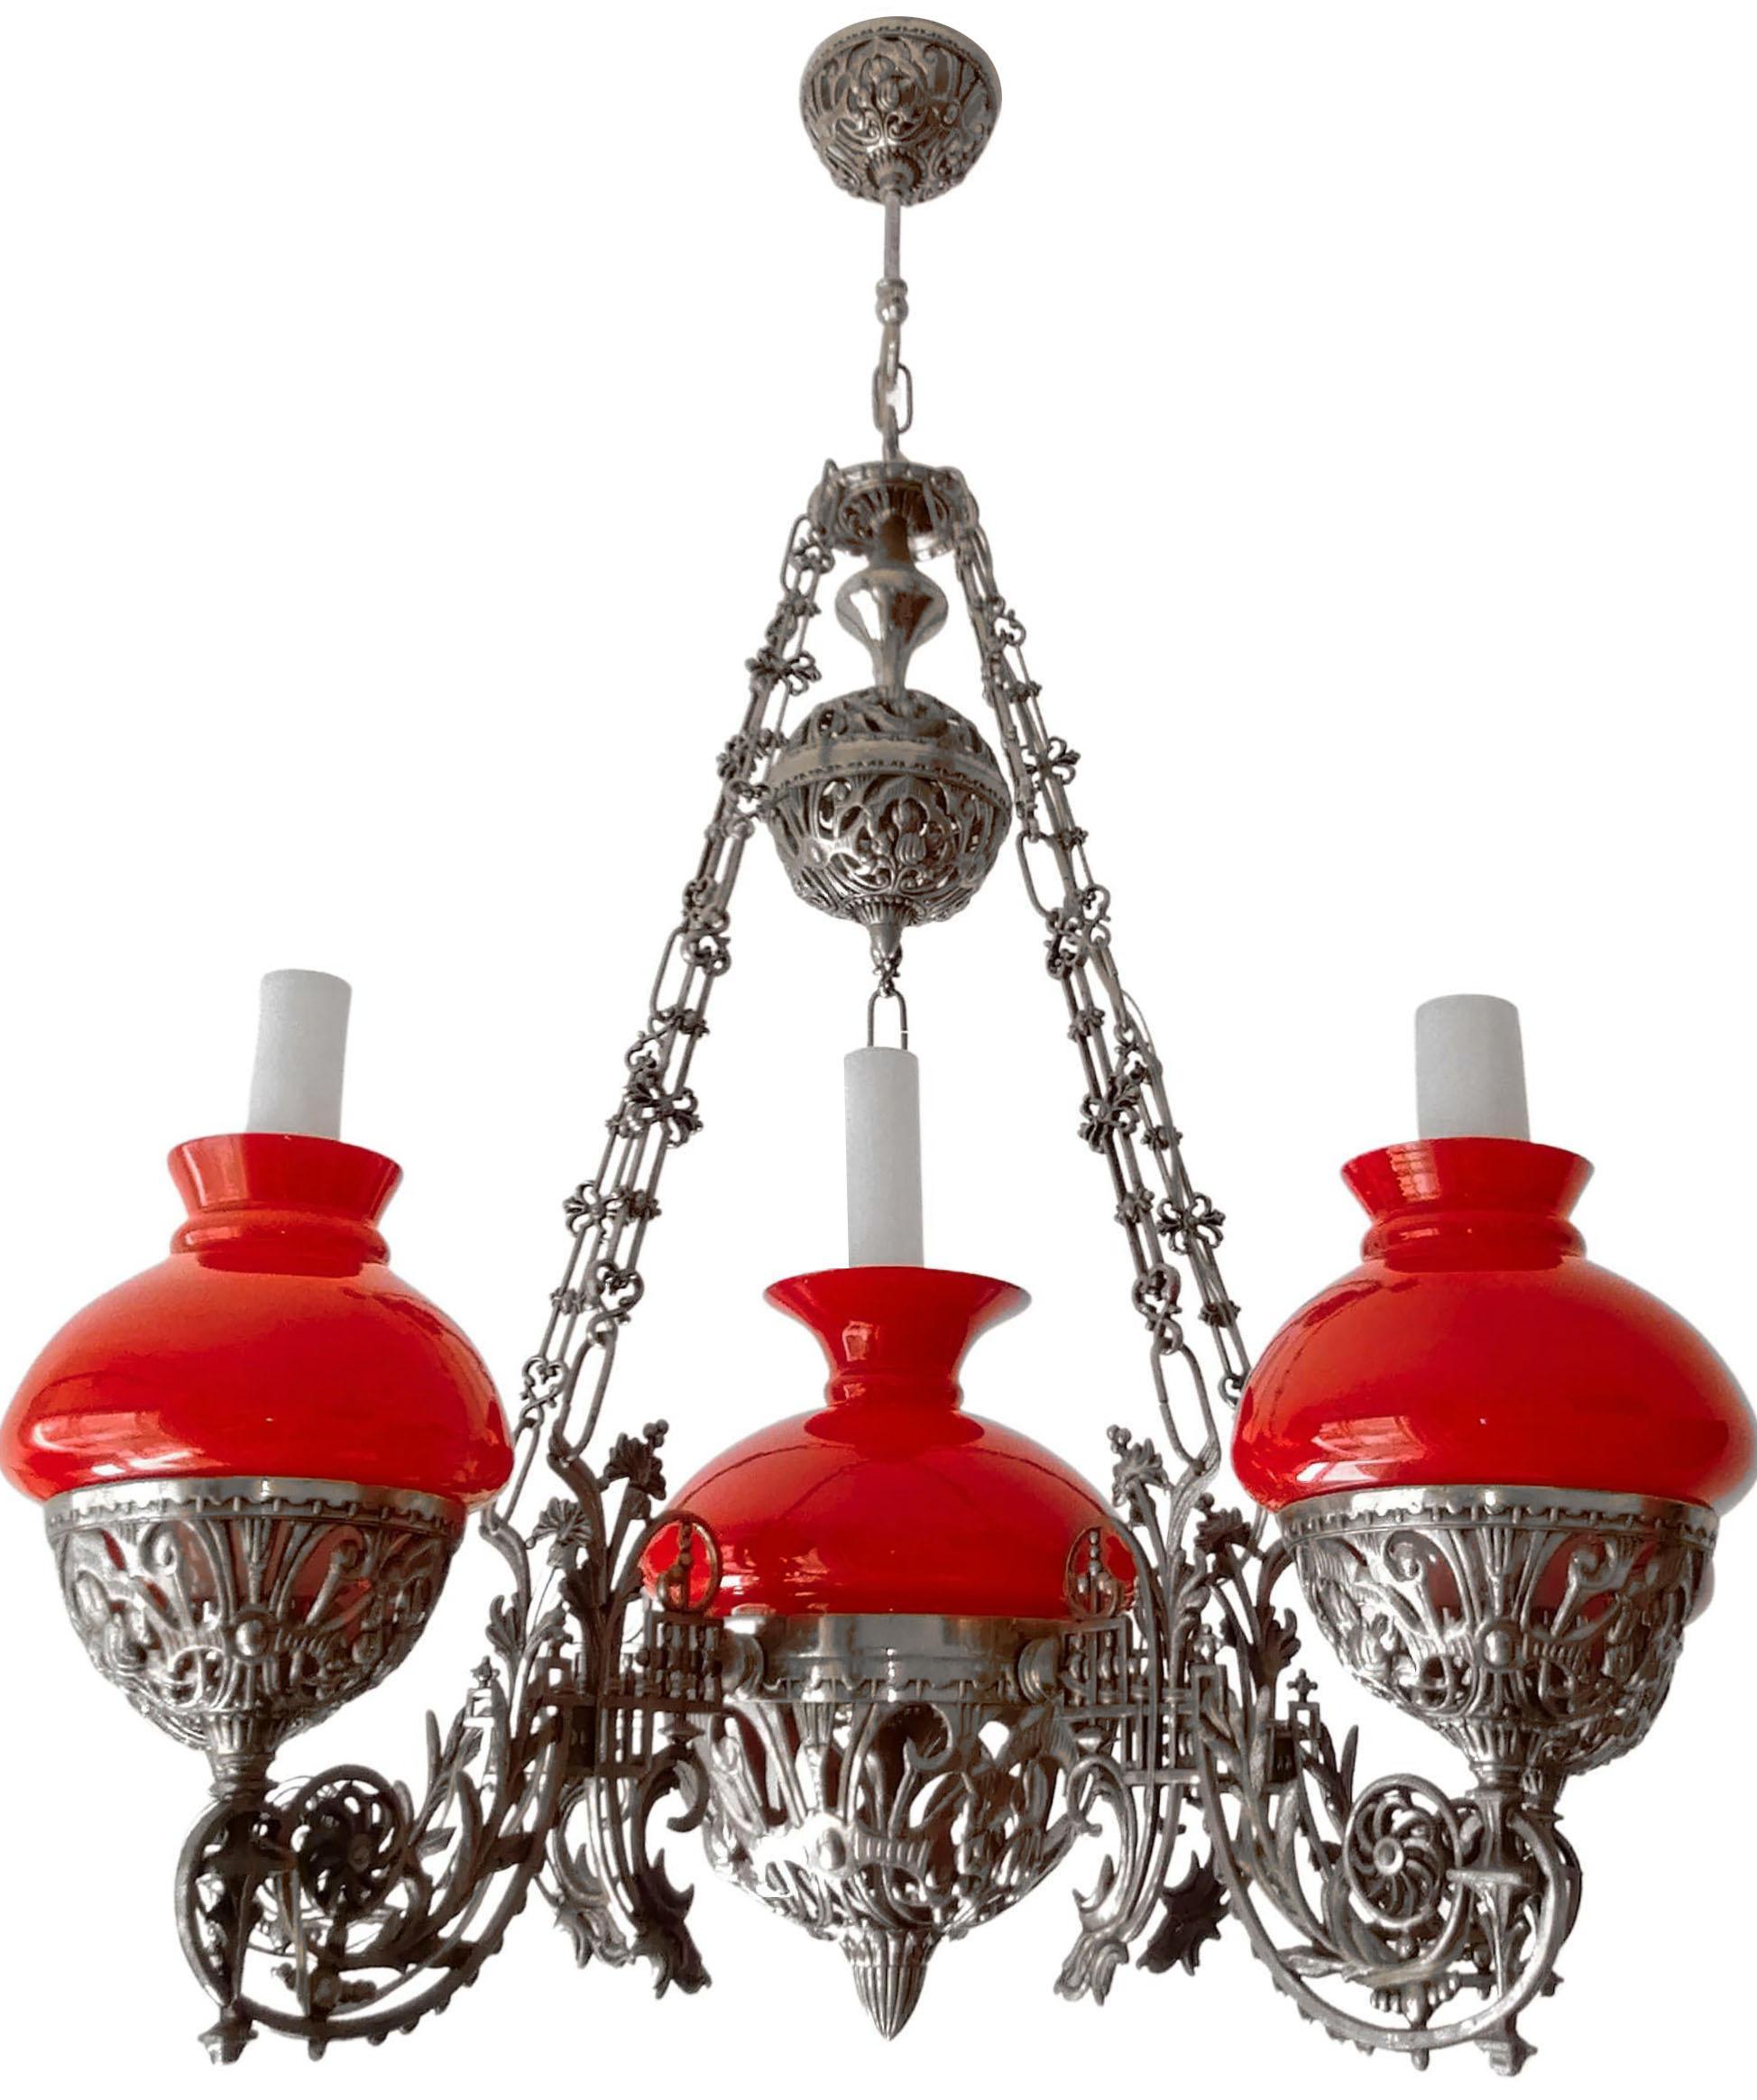 French Large Victorian Chandelier Hanging Oil Lamp in Nickel & Opaline Red Glass Shades For Sale